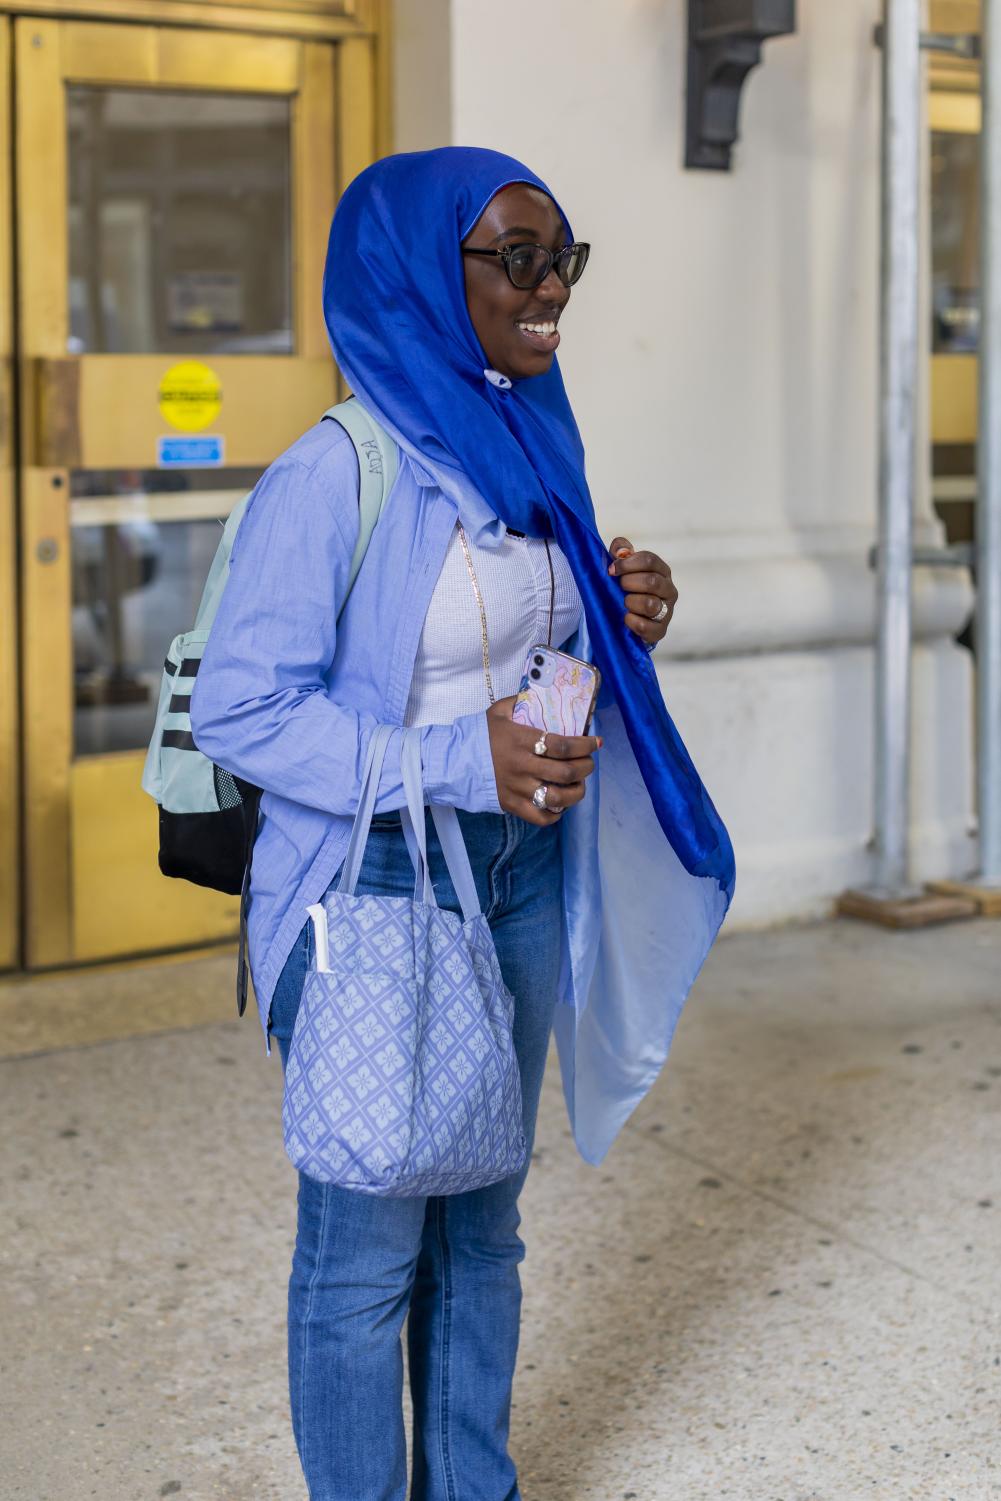 Aeja Seck stands outside of a College of Arts and Science building wearing jeans, a white shirt, a blue unbuttoned shirt and a head covering.